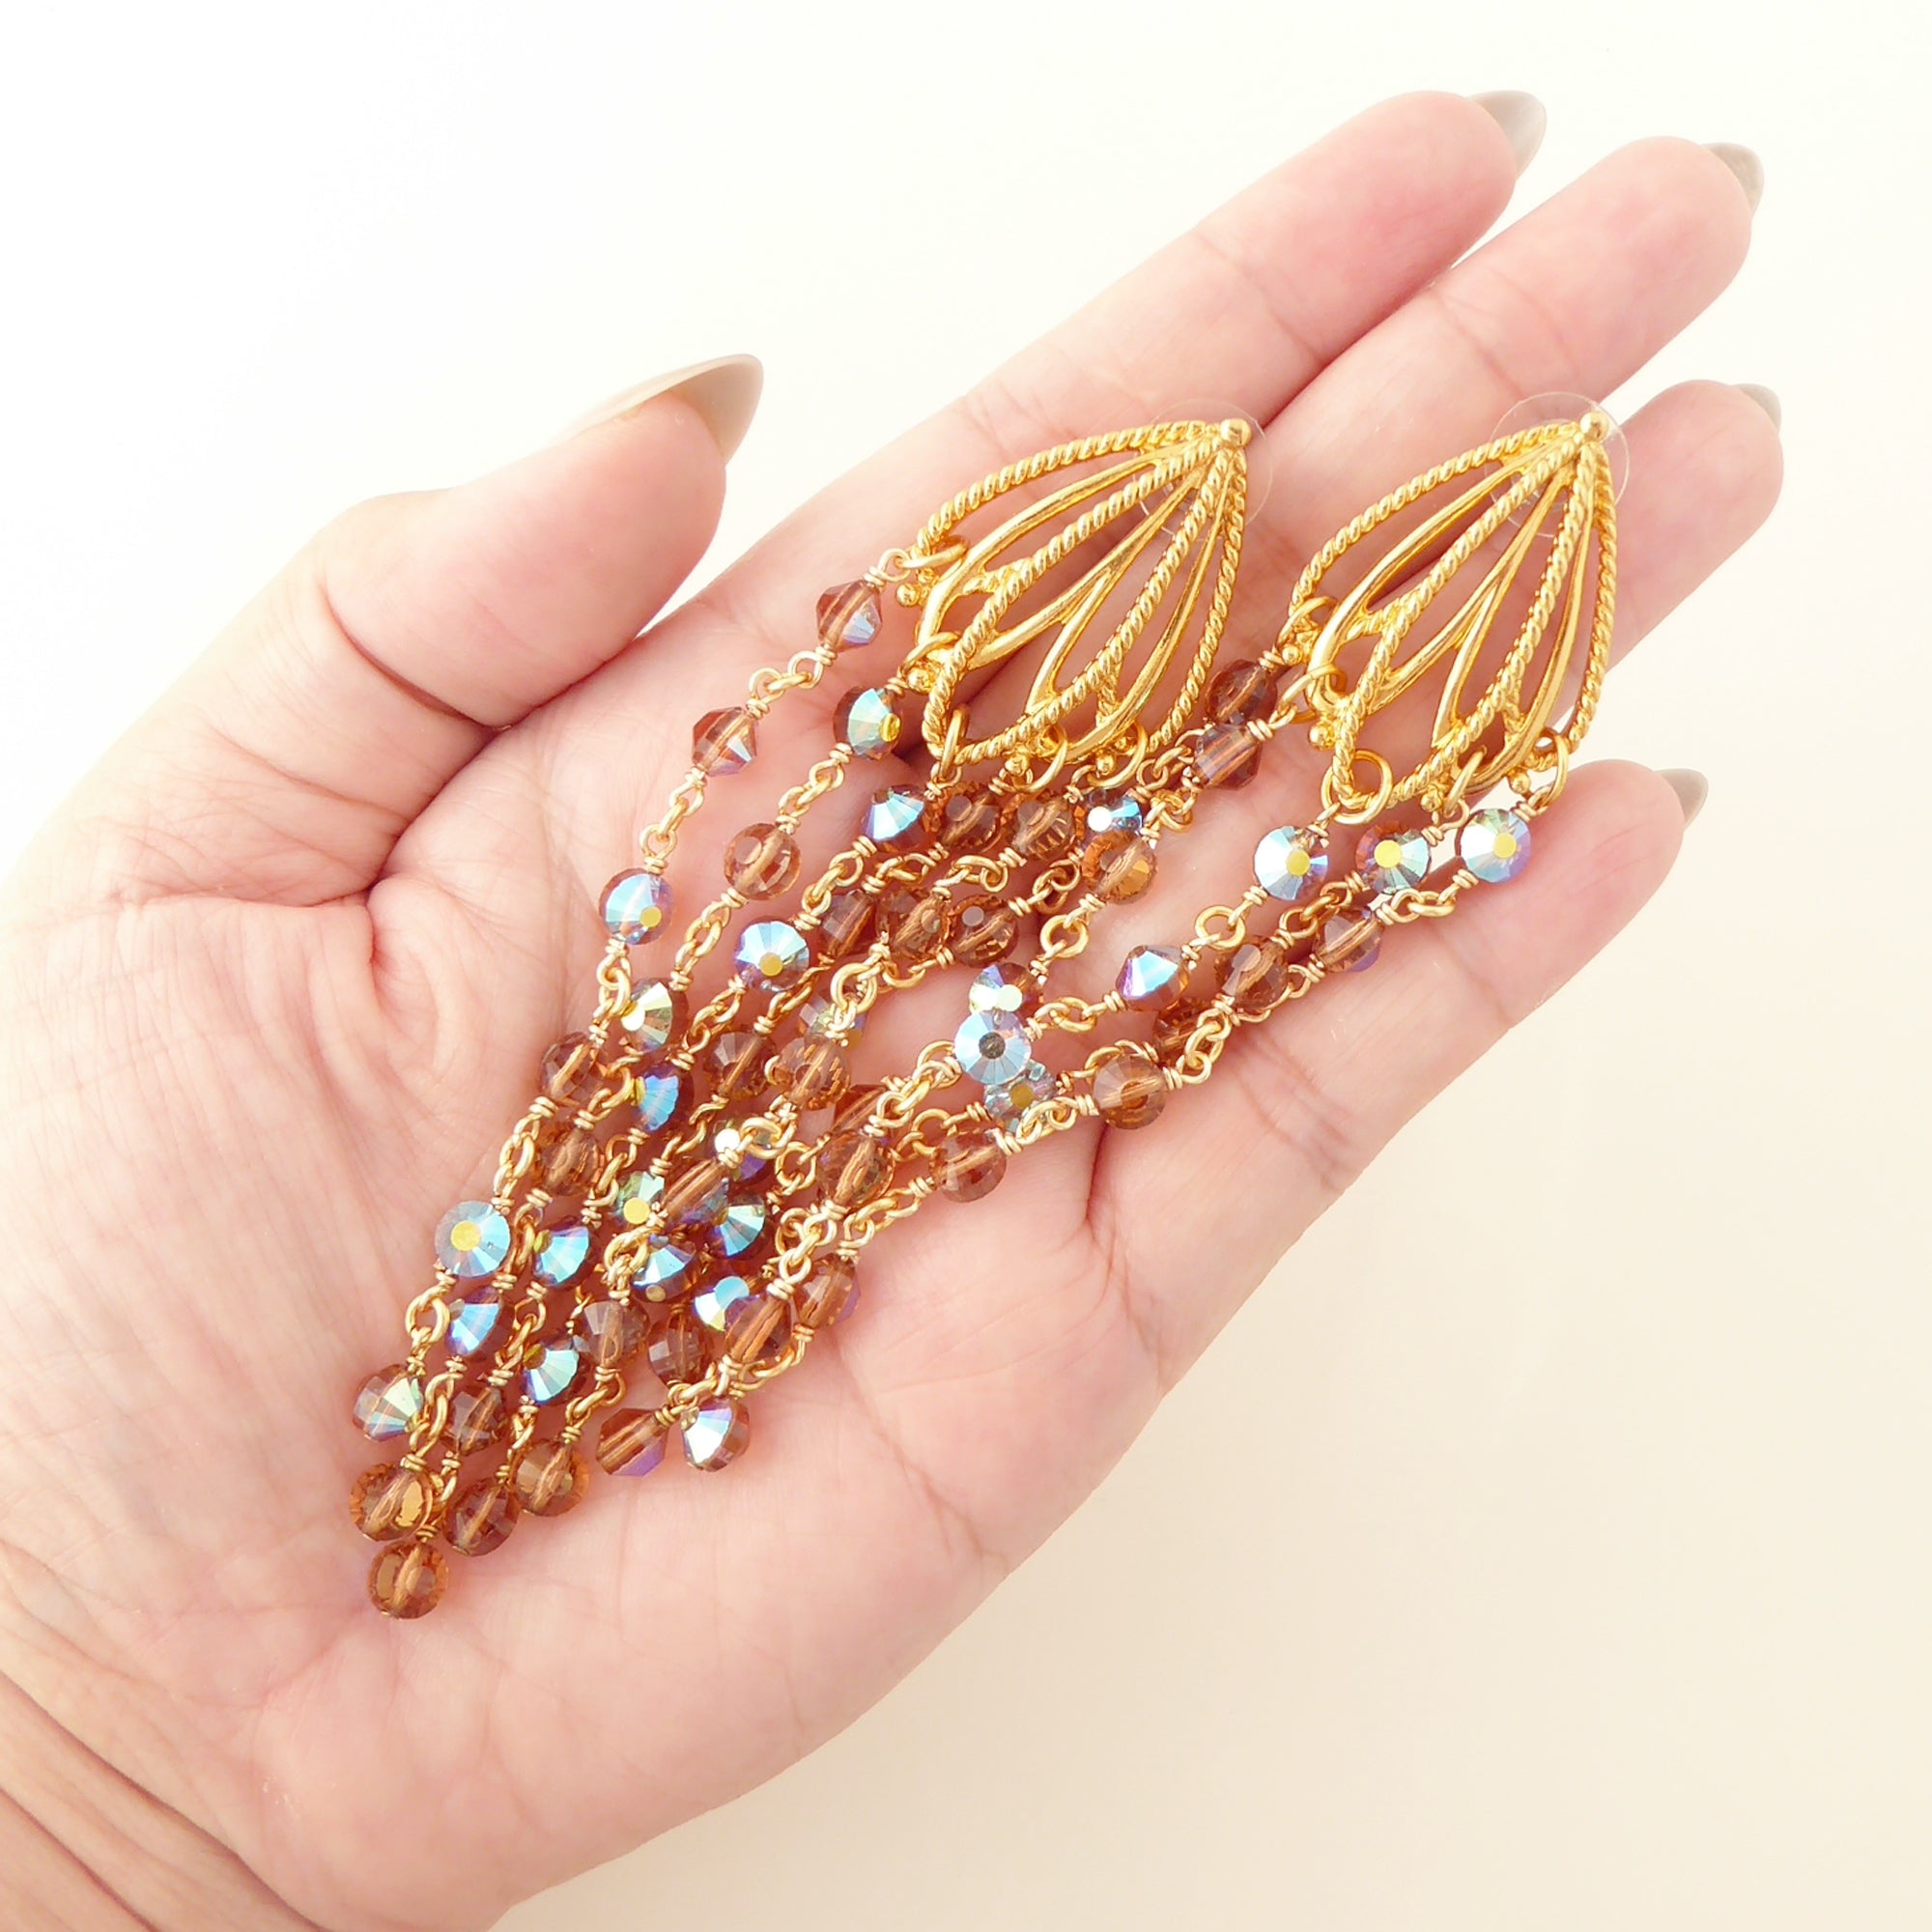 Iridescent topaz chandelier earrings by Jenny Dayco 4